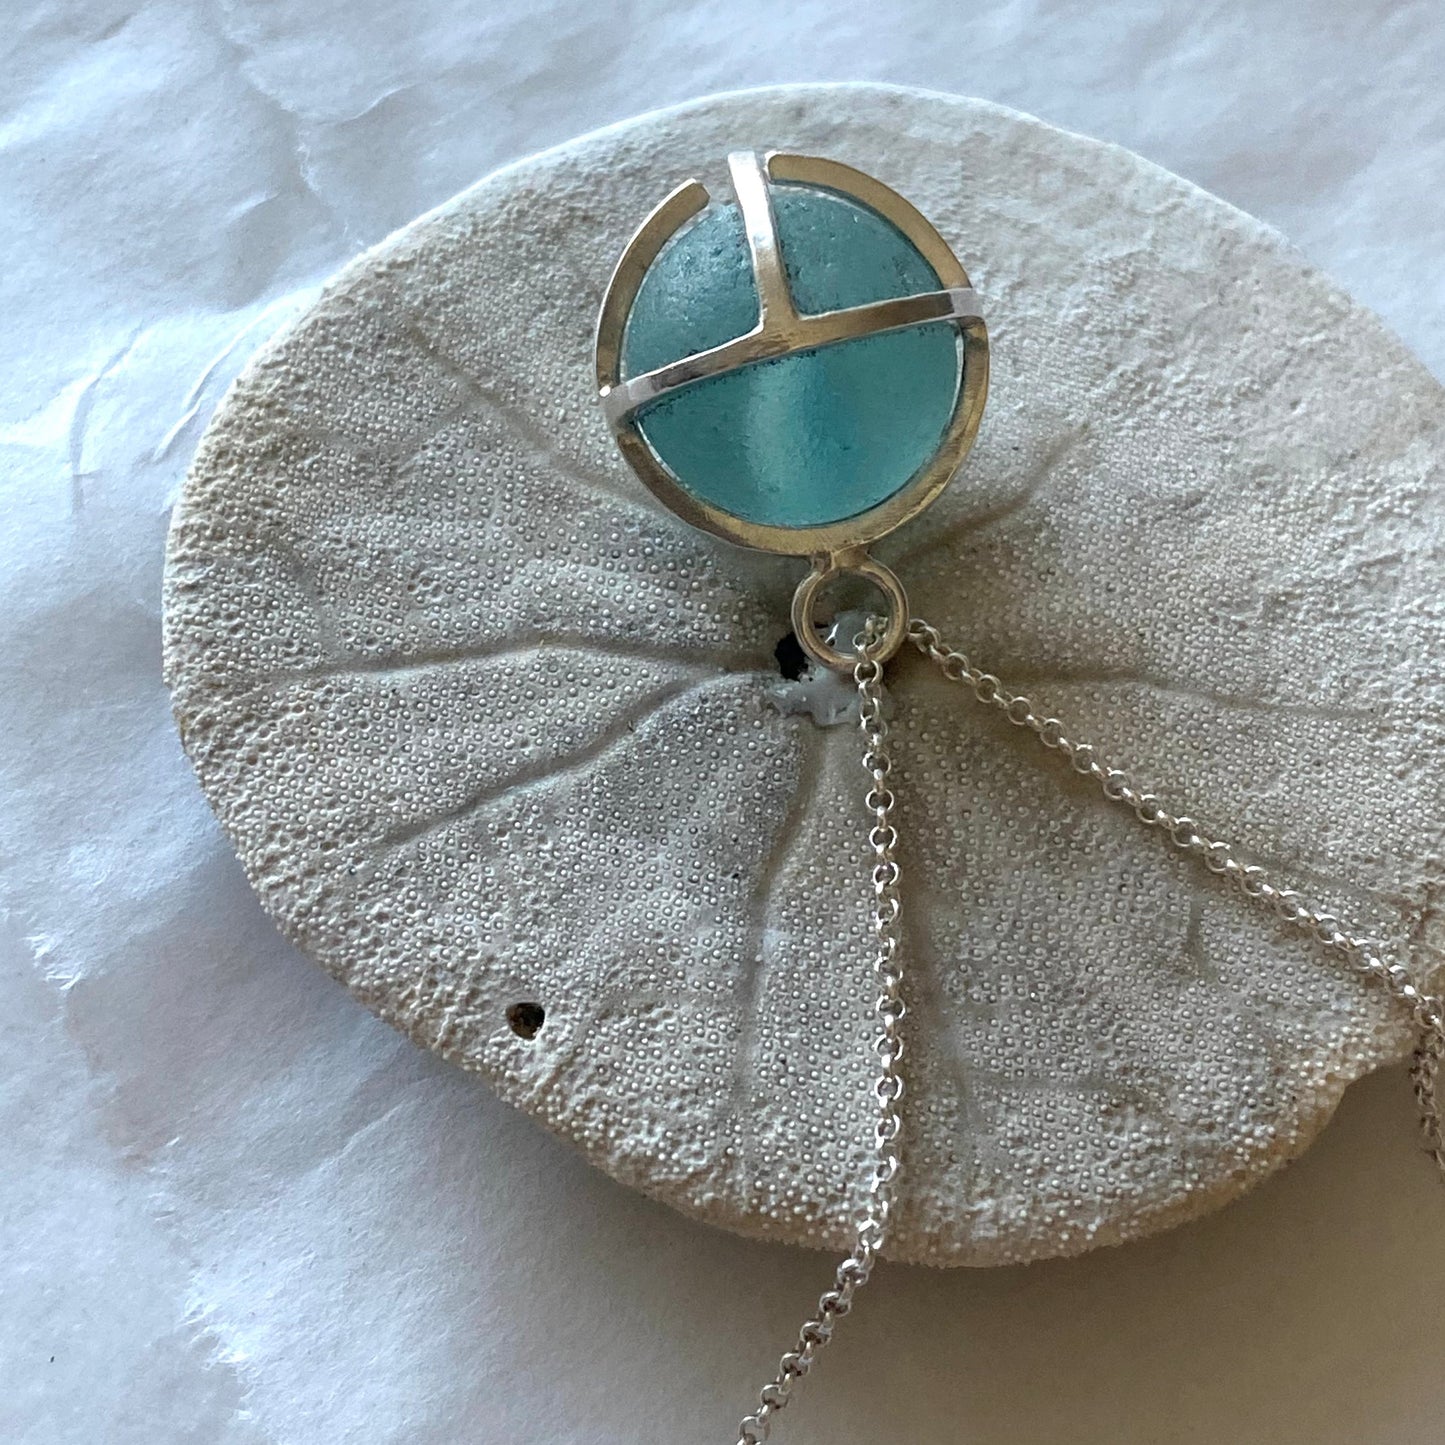 The Caged Pendant with Sea Glass Marble